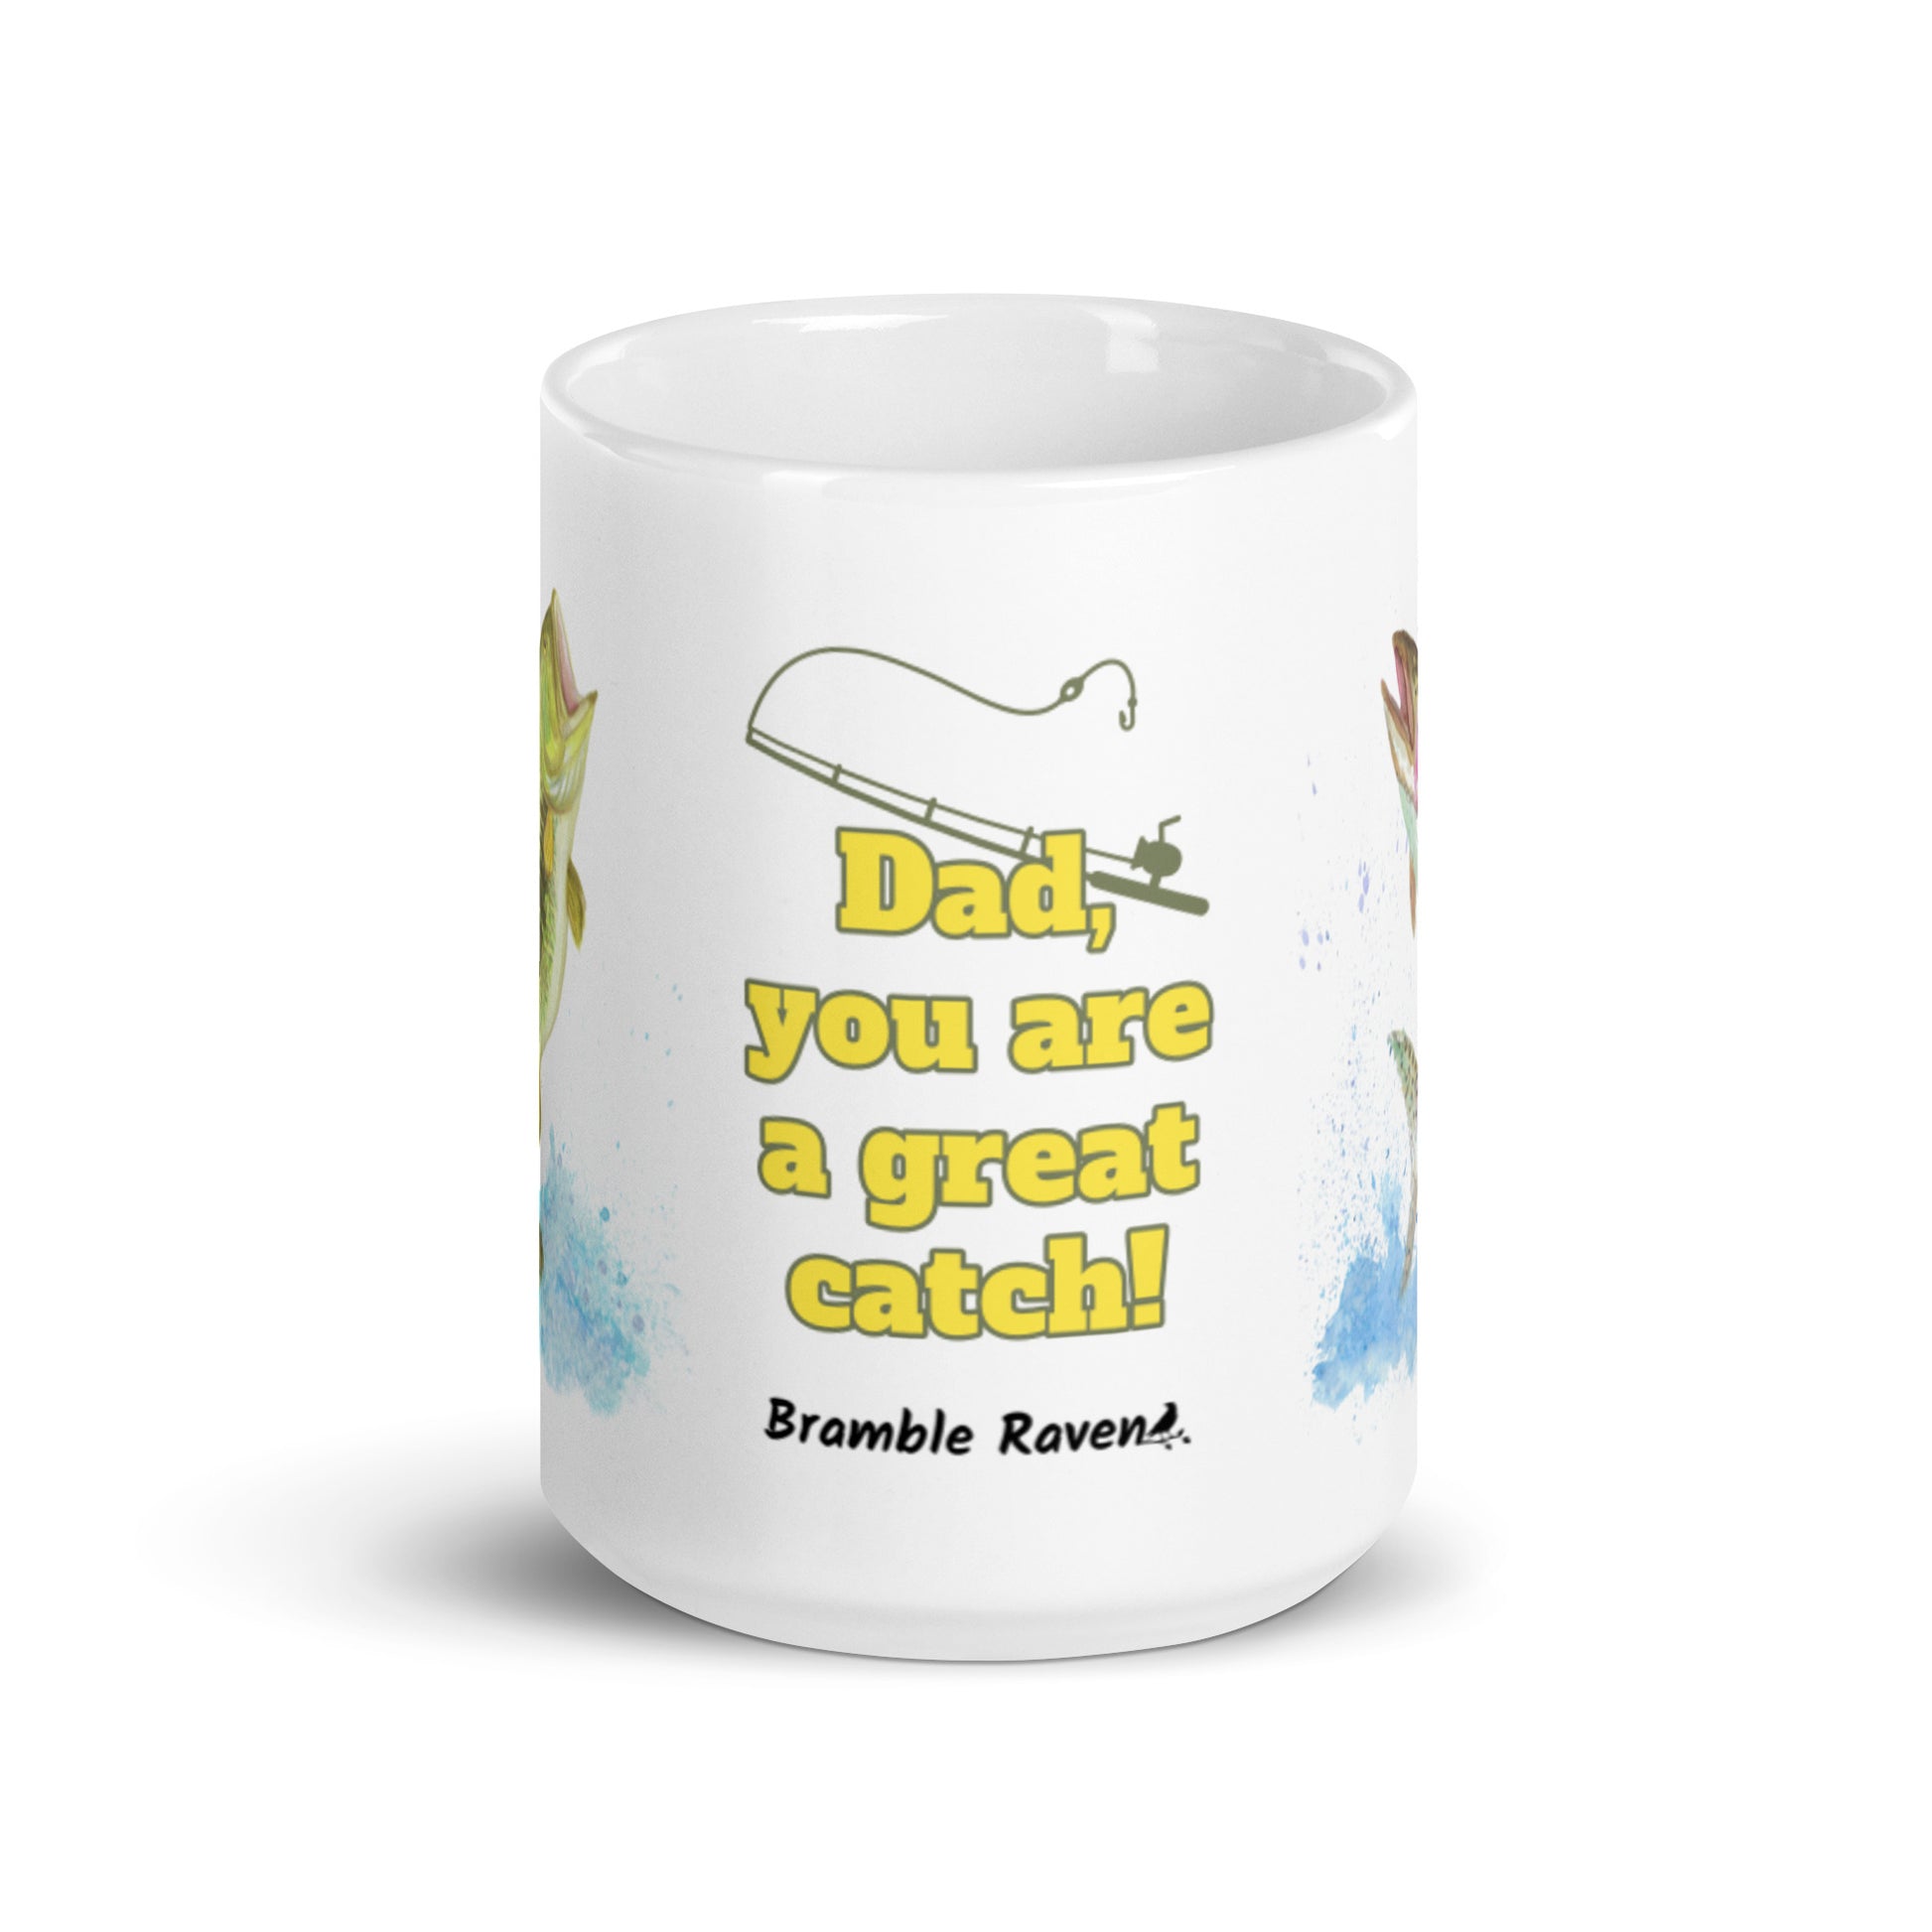 15 ounce ceramic mug. Features watercolor print of a rainbow trout and a largemouth bass with text that says: Dad, you are a great catch!